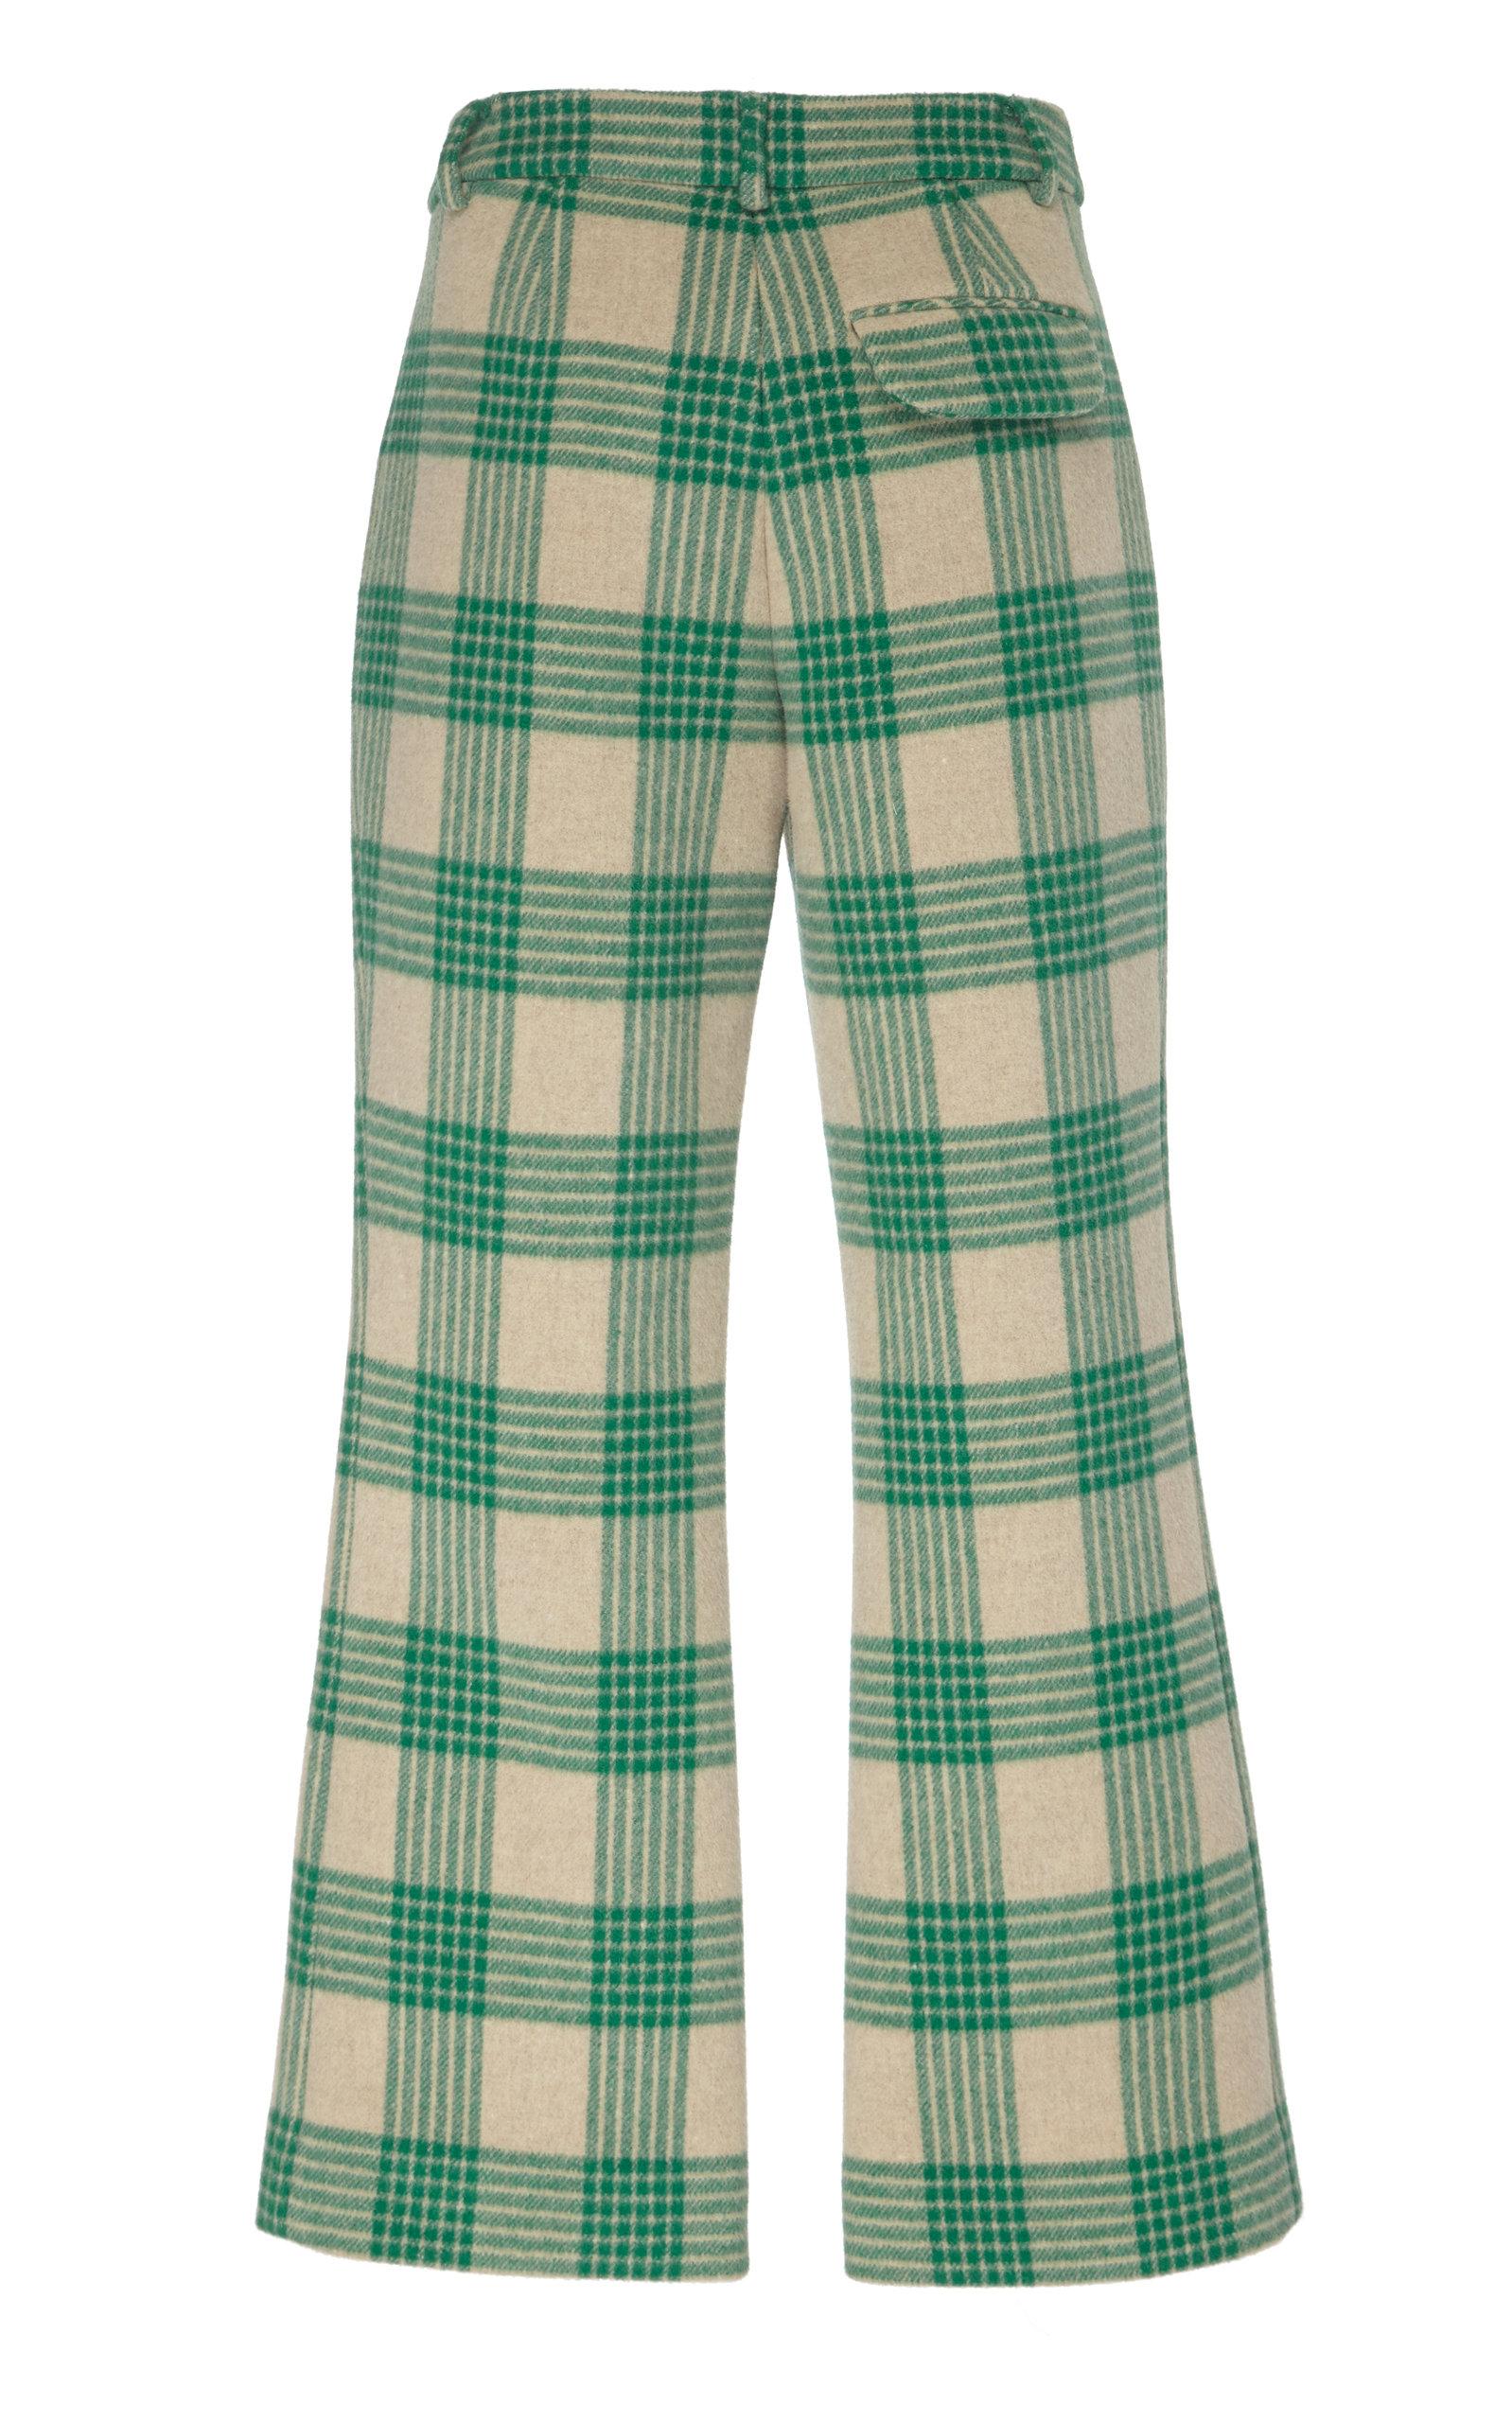 Rejina Pyo Wool Checked Kick Flared Trousers in Green - Lyst